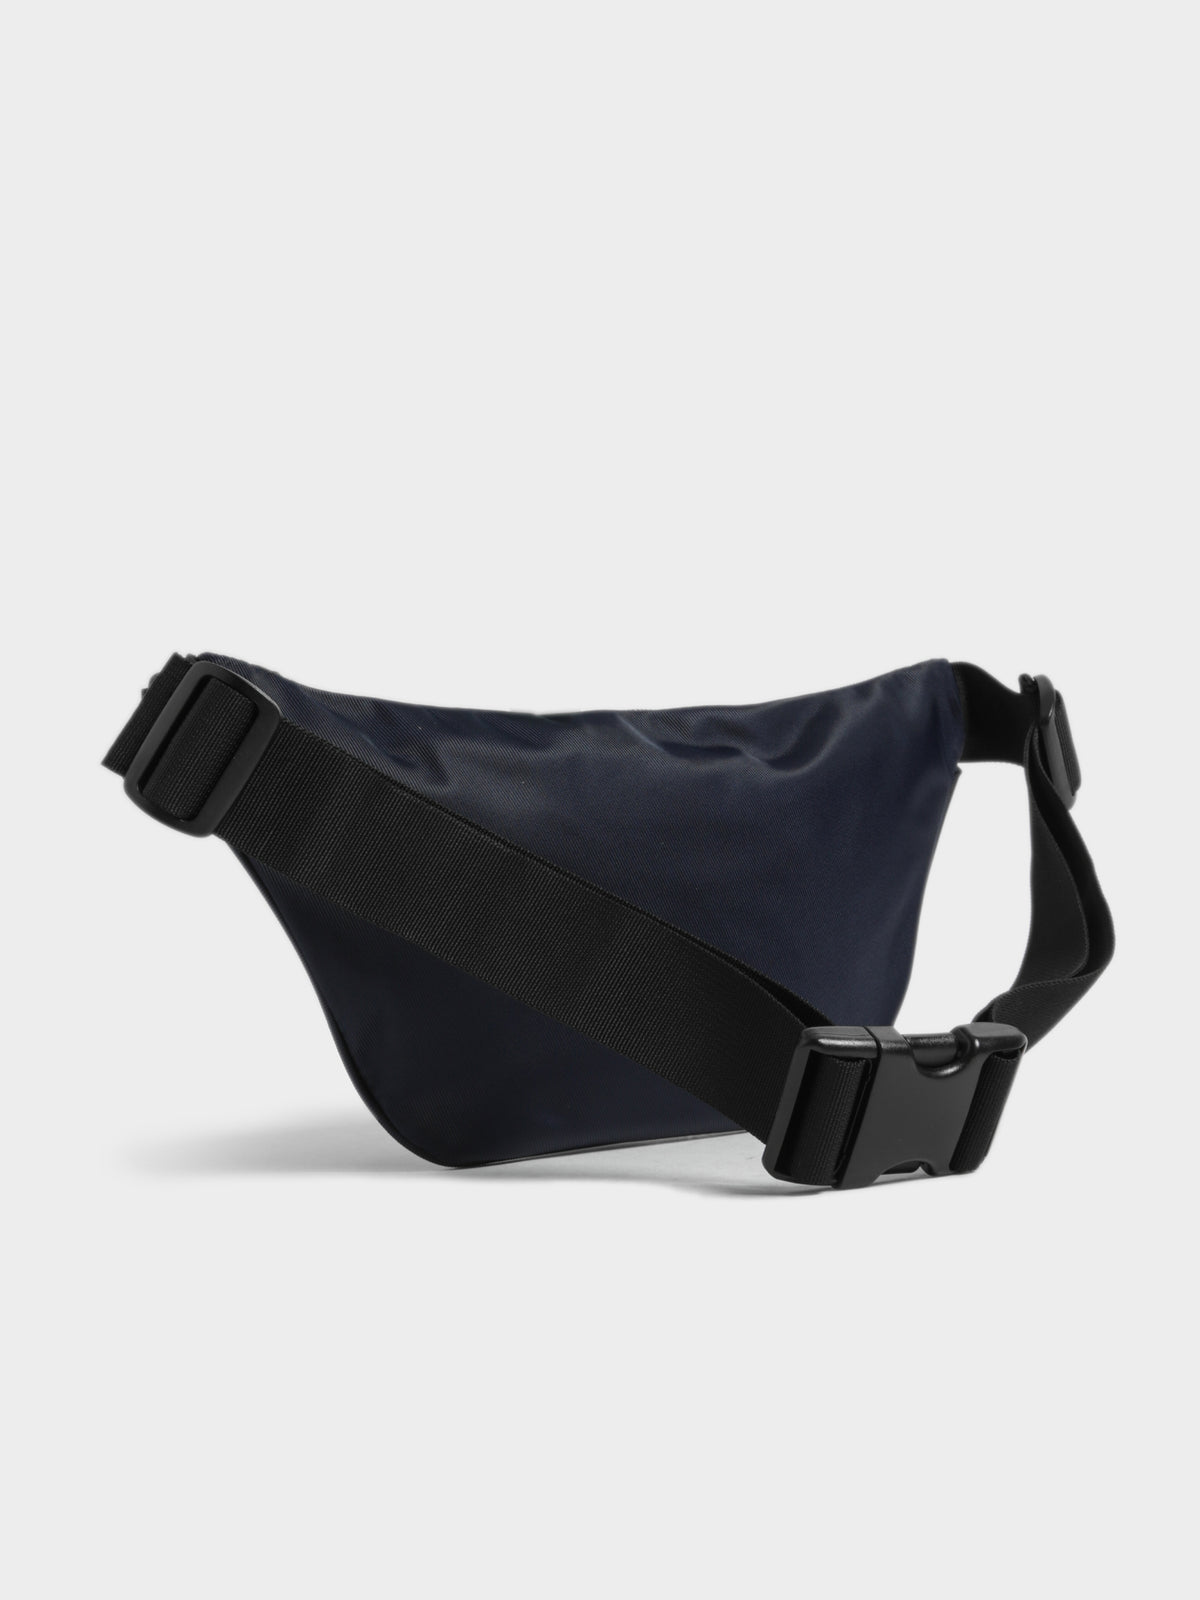 Polo Sport Waist Pack in Navy